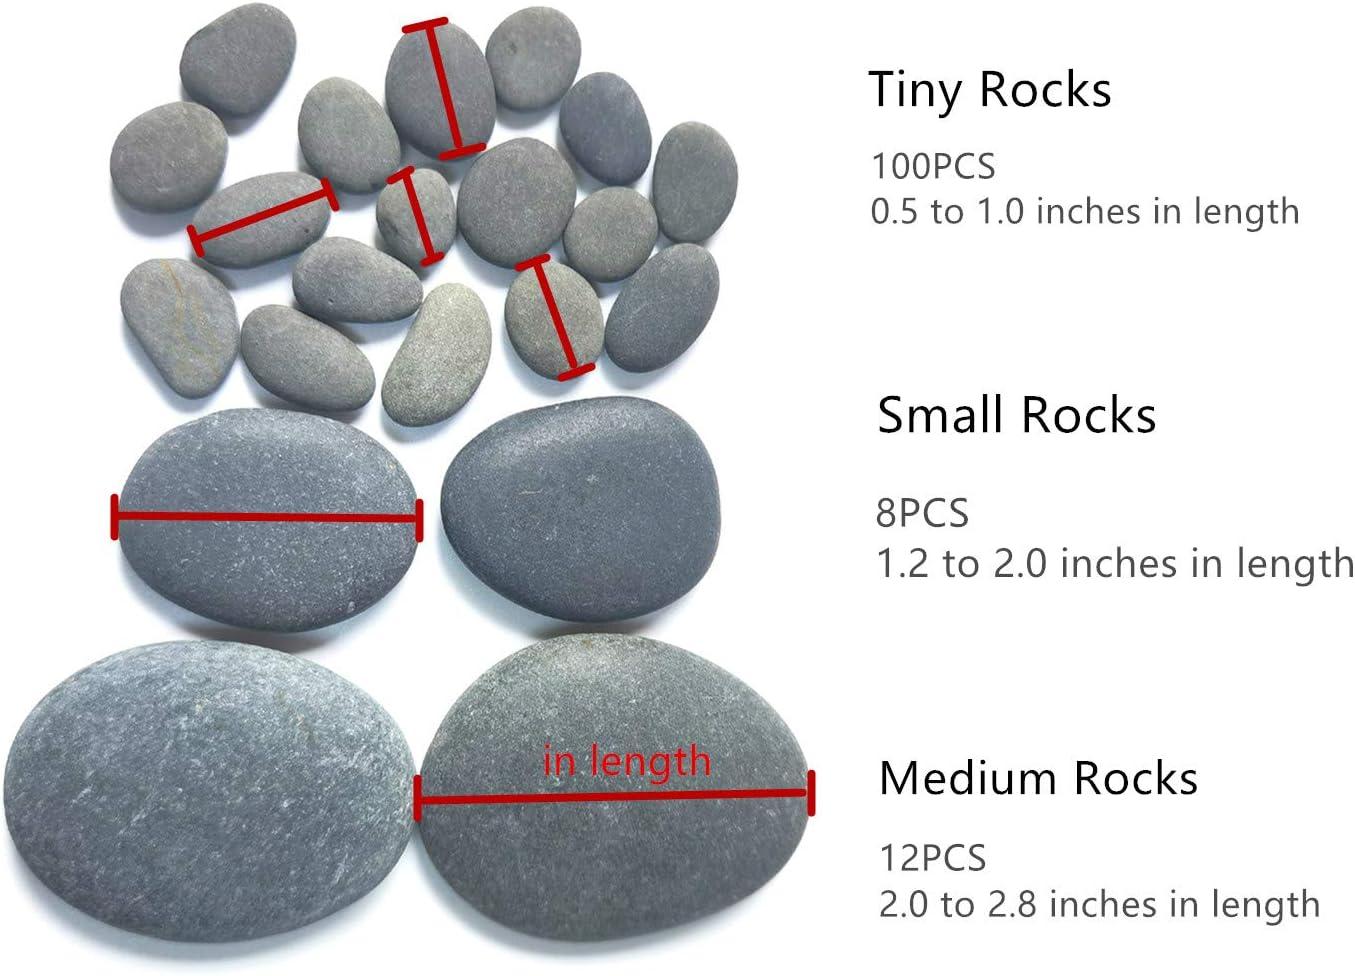 Lifetop 120PCS Painting Rocks DIY Rocks Flat & Smooth Kindness Rocks for  Arts Crafts Decoration Medium/Small/Tiny Rocks for Painting Hand Picked for  Painting Rocks